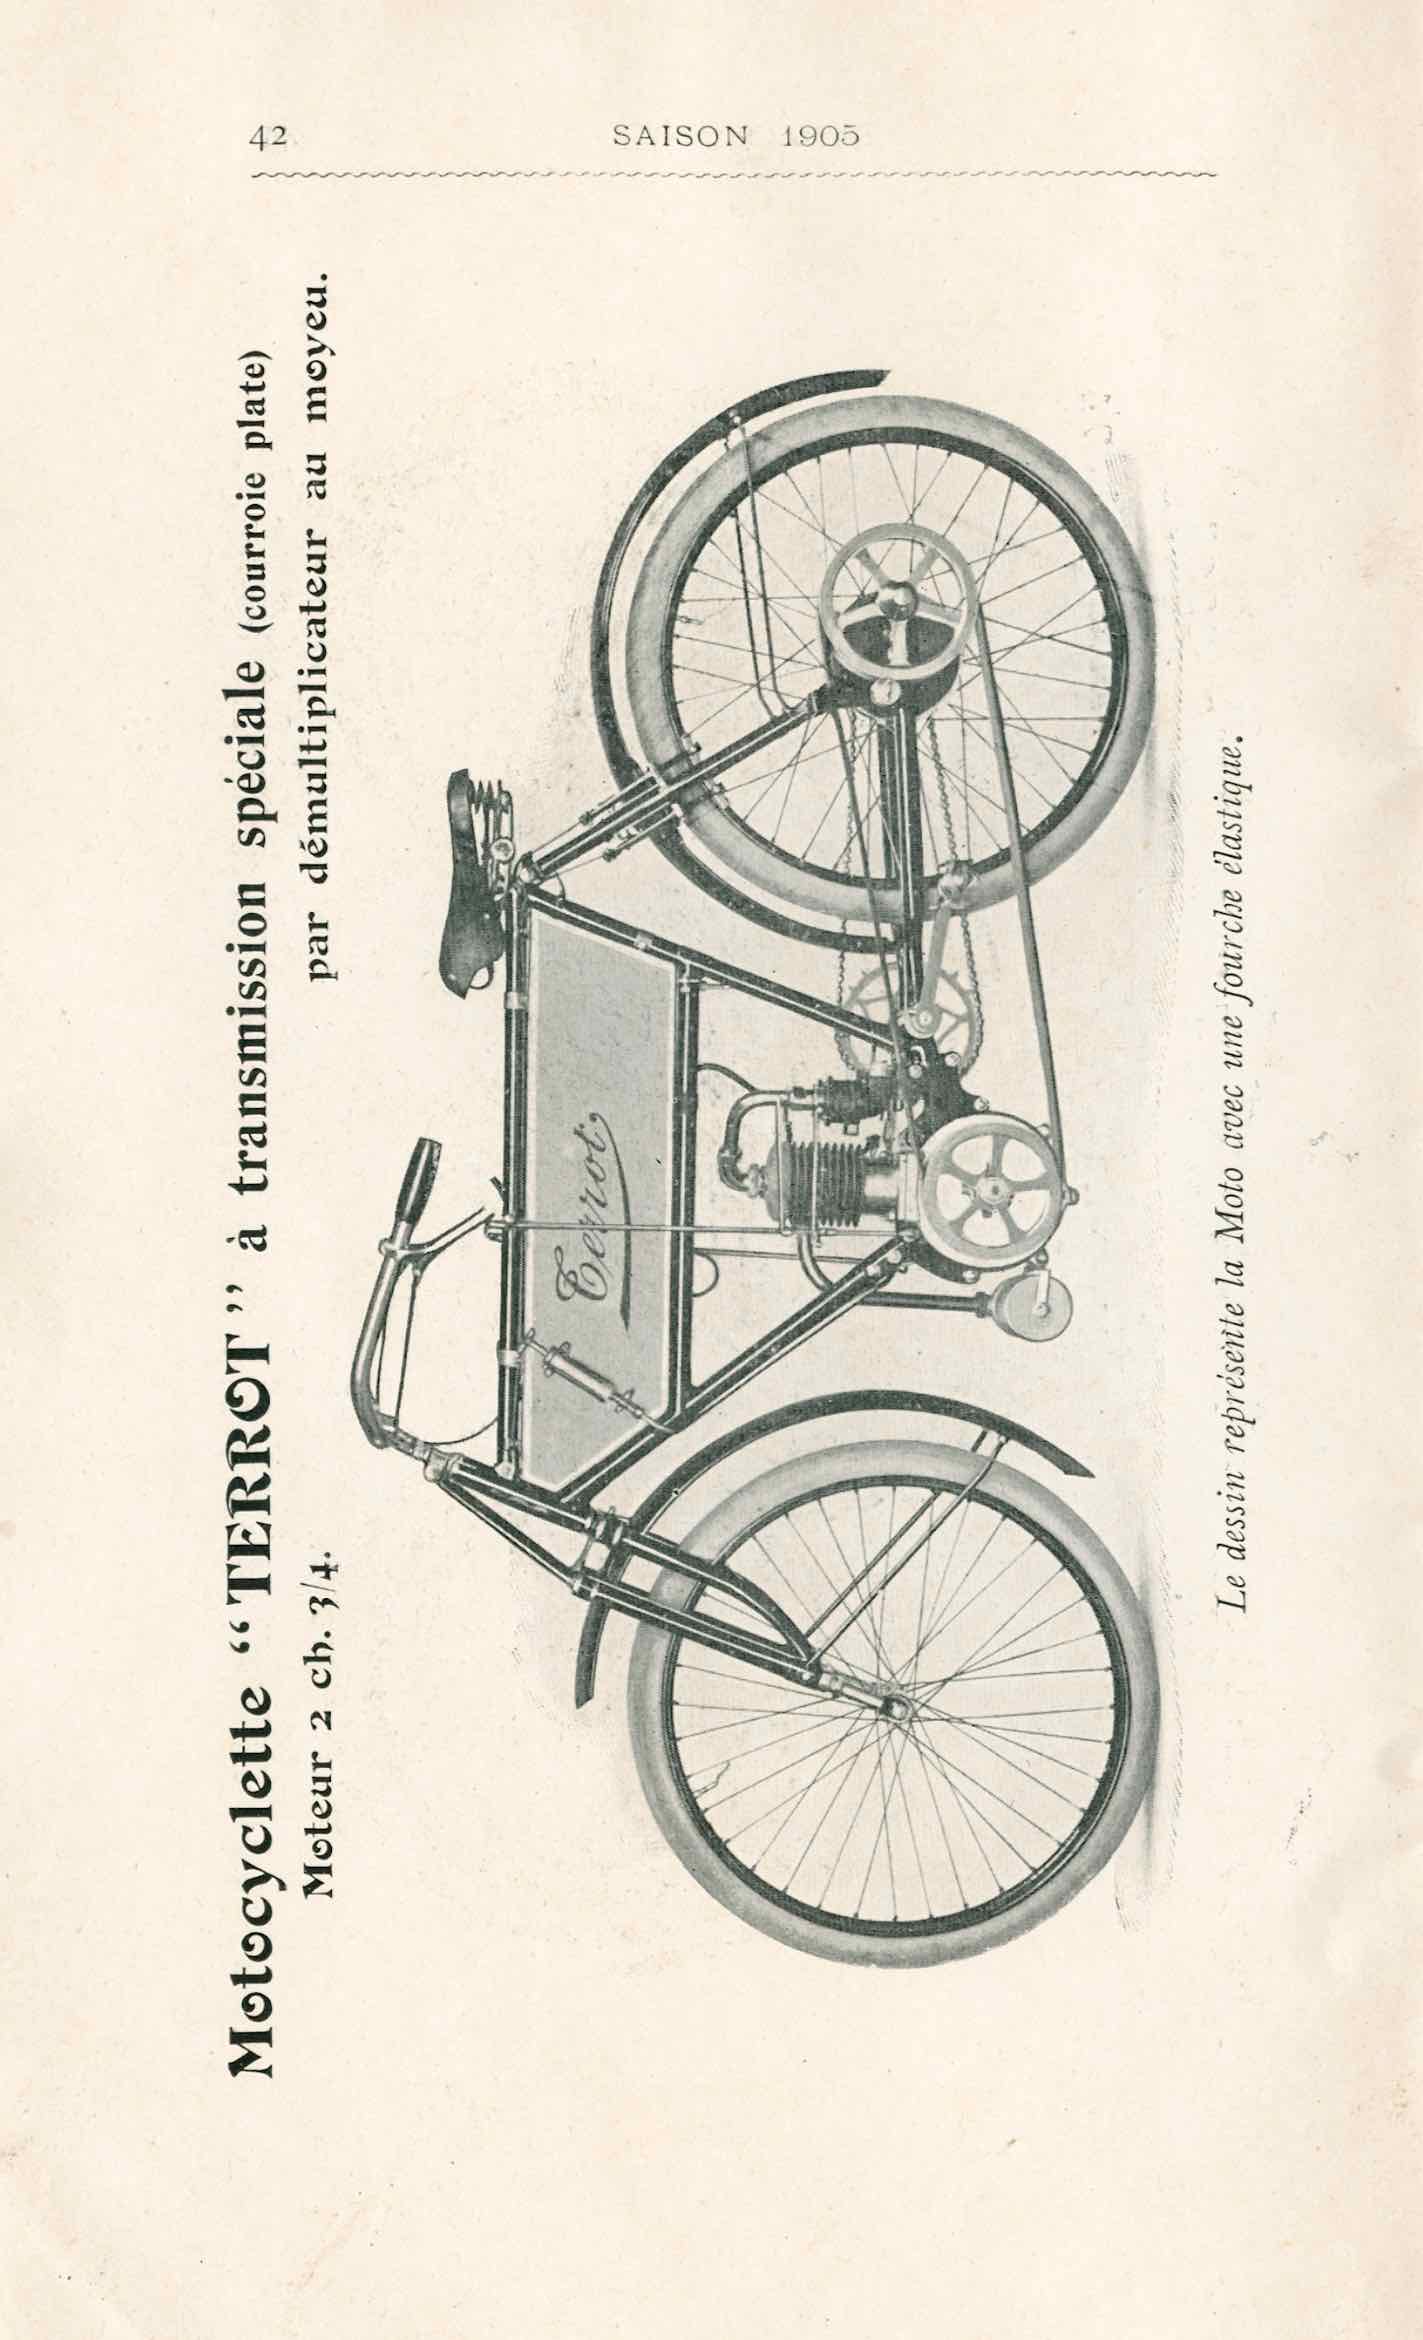 Terrot & Cie - Cycles & Motorcyclettes 1905 page 42 main image